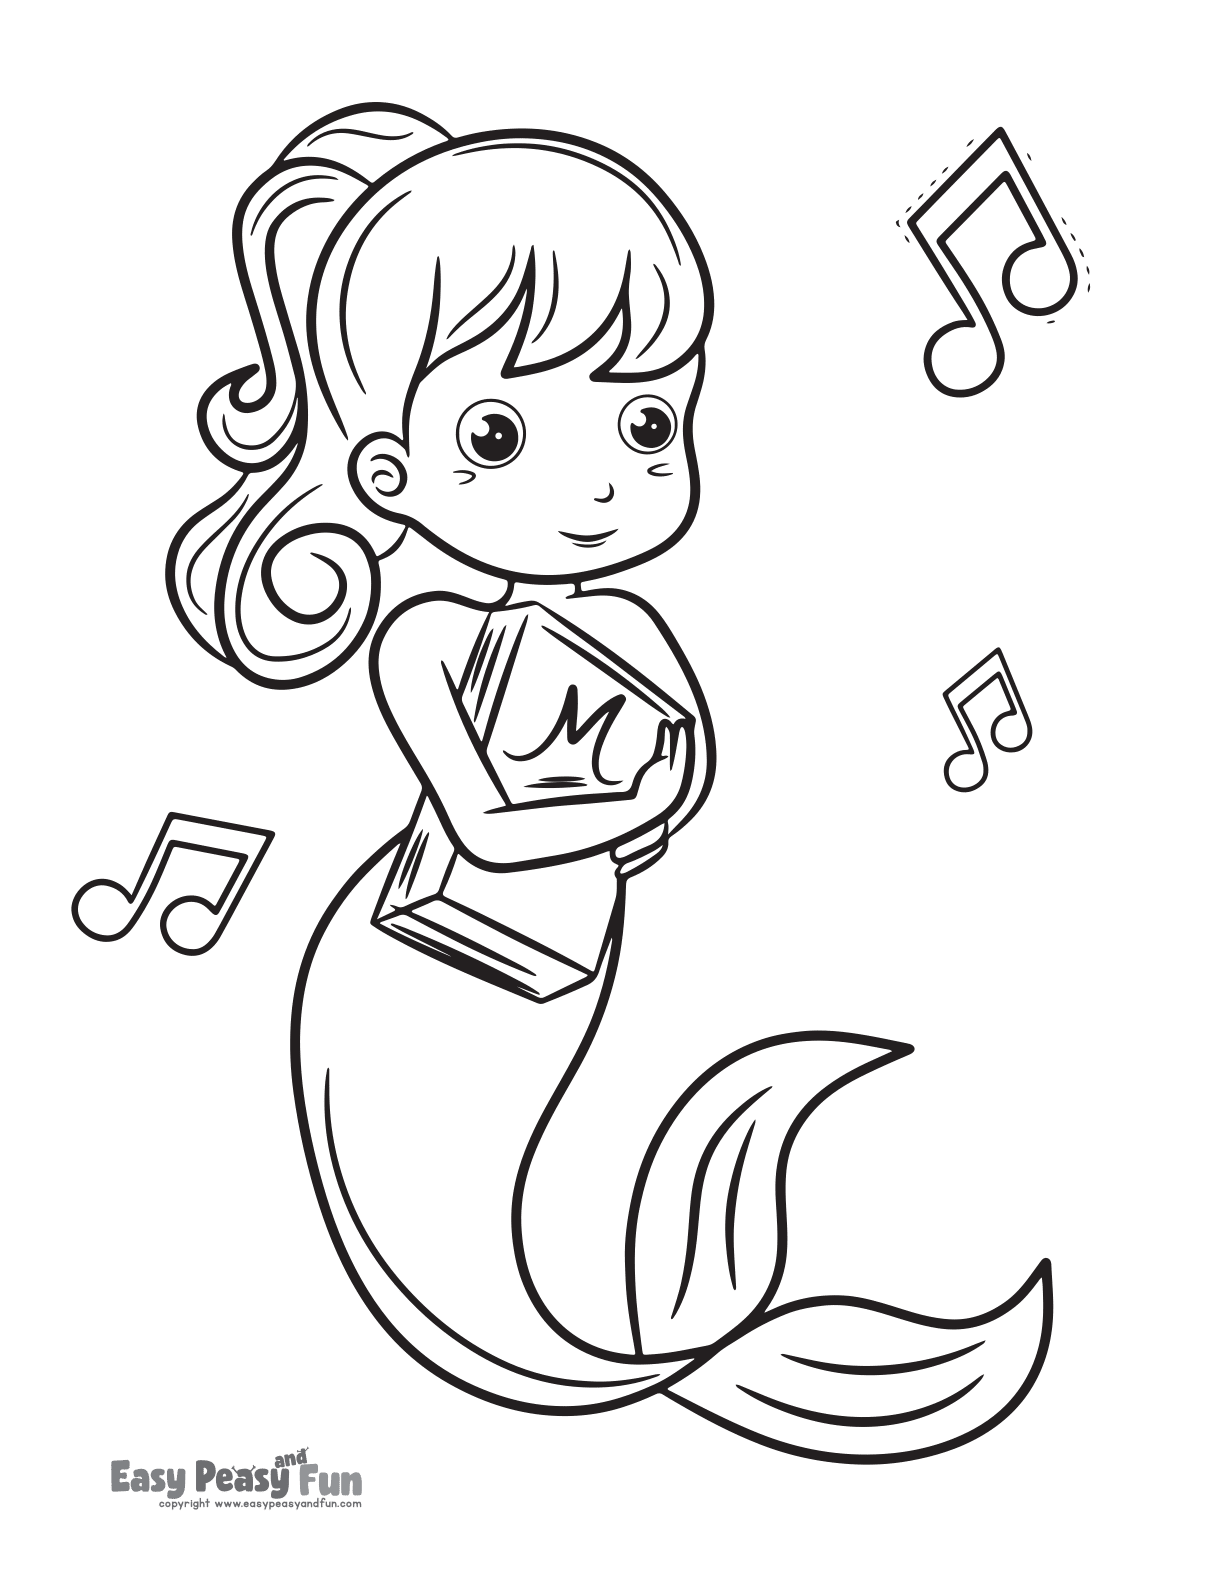 10 Best Mermaid Coloring Pages for Kids - Motherly